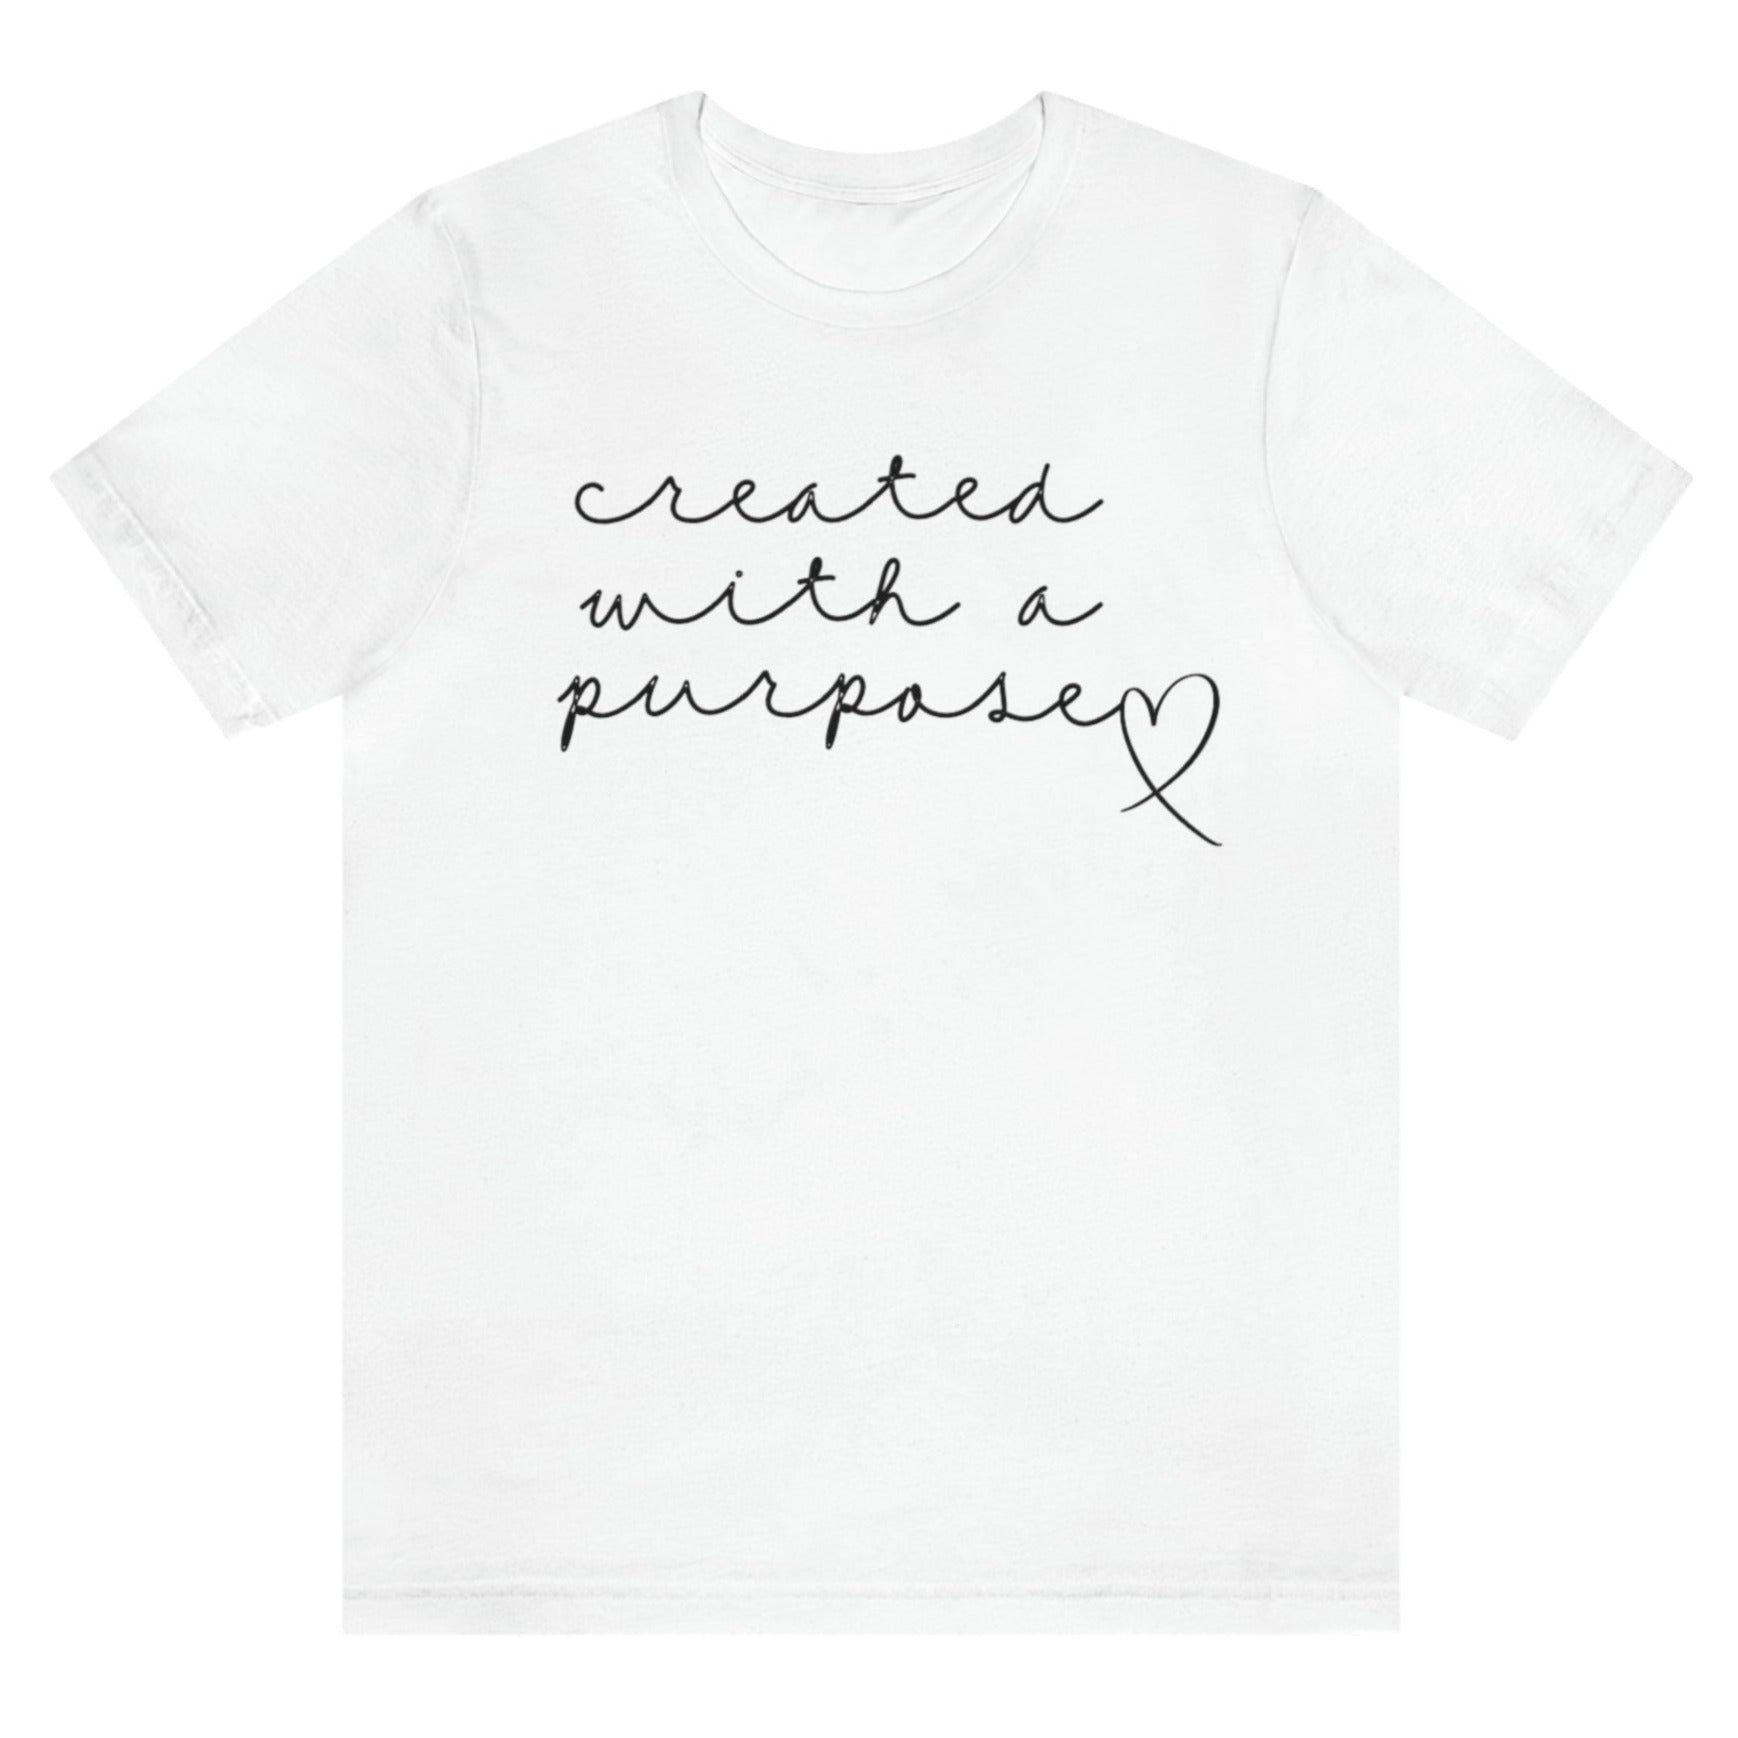 created-with-a-purpose-white-t-shirt